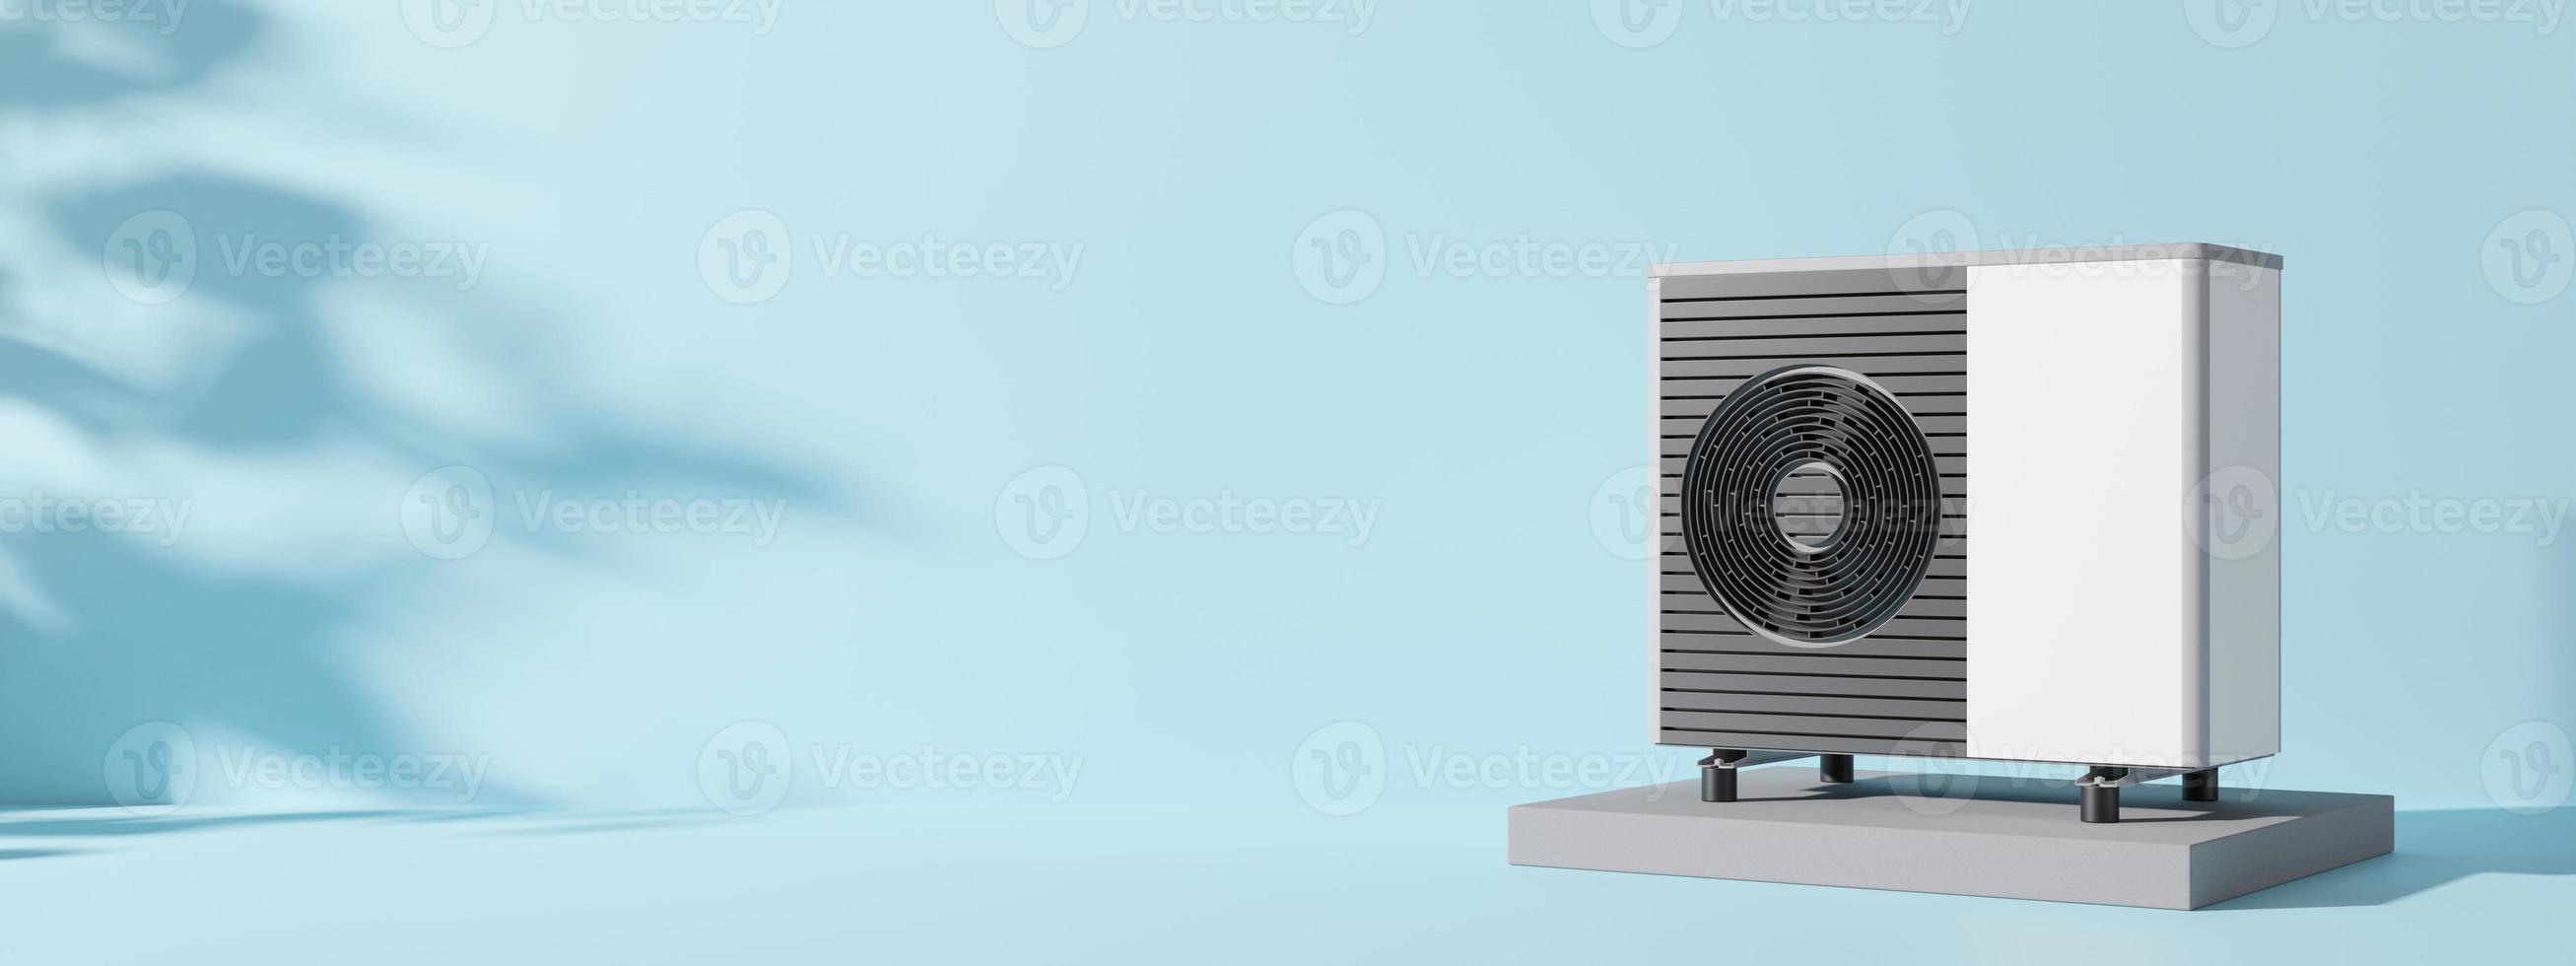 Air heat pump on blue background. Modern, environmentally friendly heating. Air source heat pumps are efficient and renewable source of energy. Banner with copy space for text, advertising. 3d render. photo